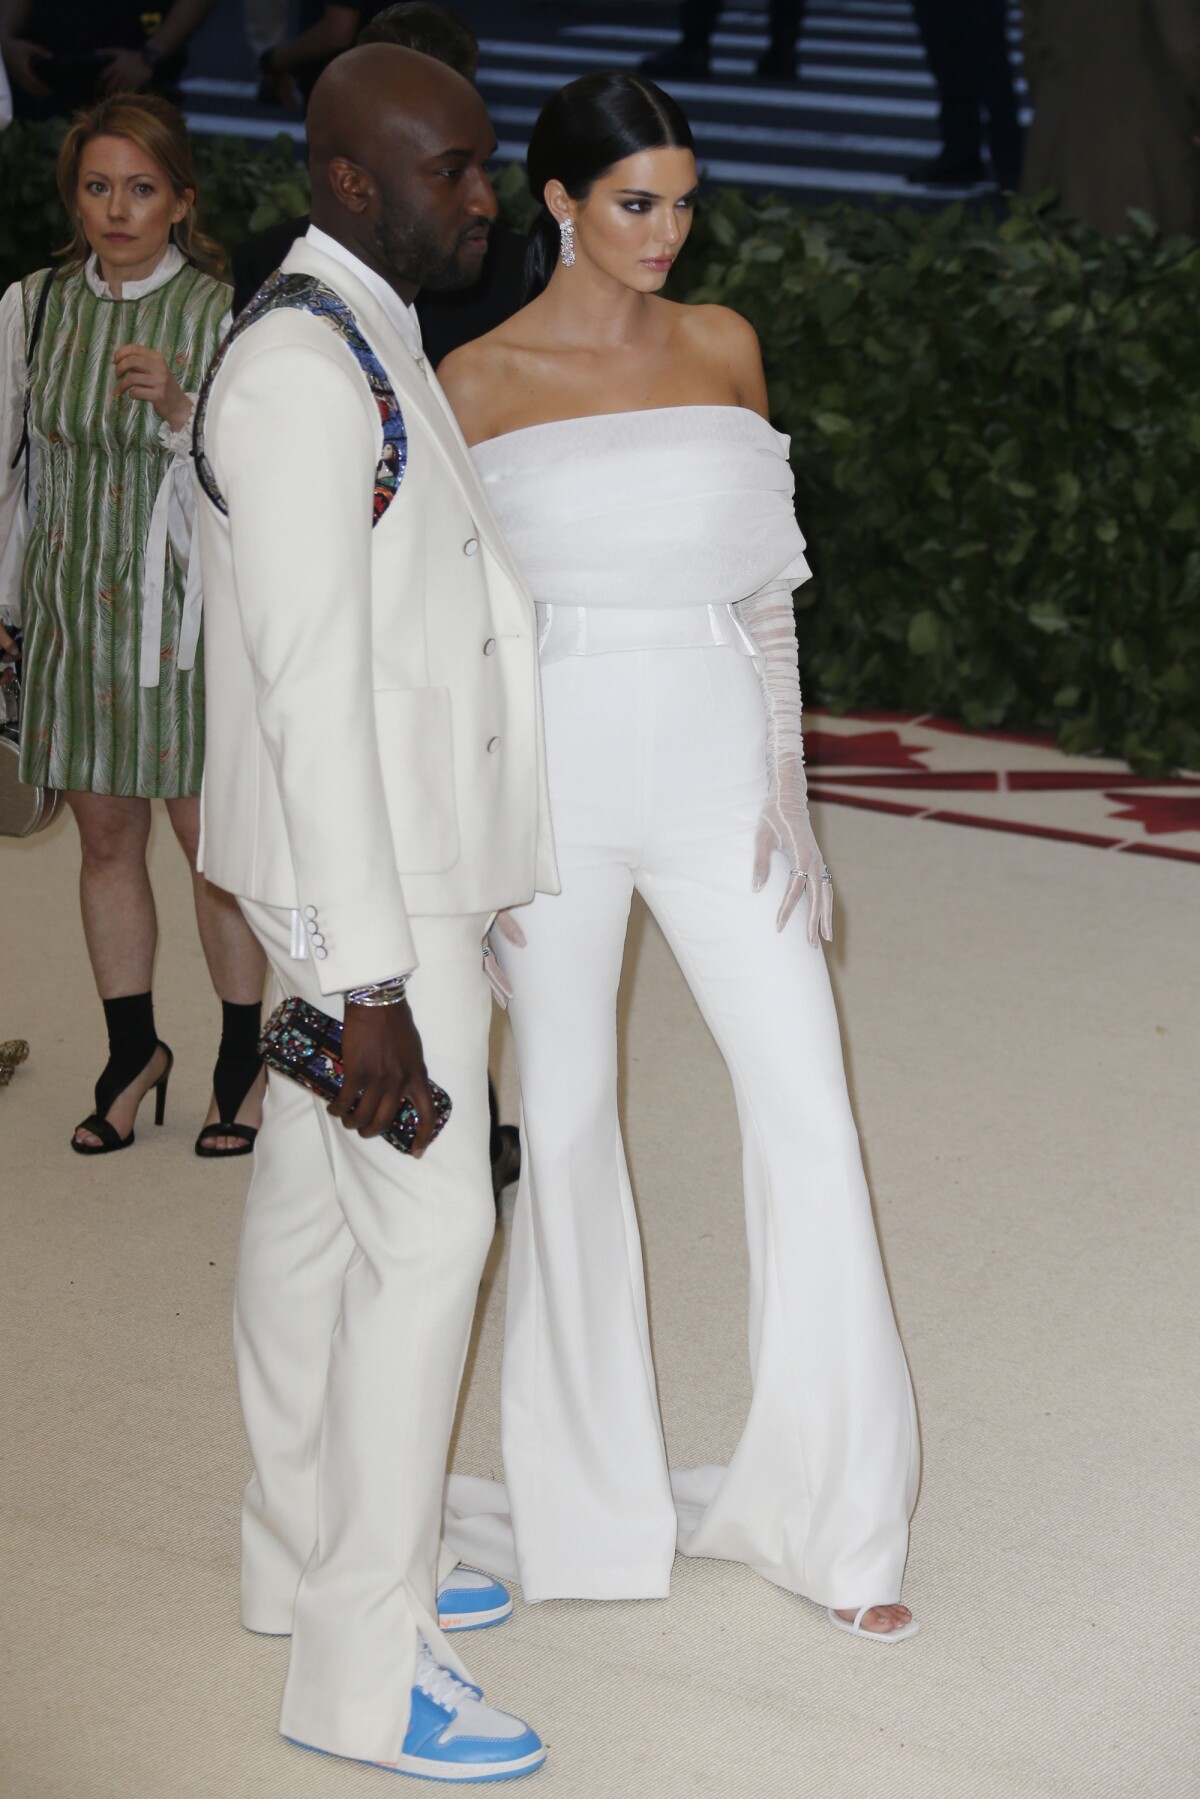 Virgil Abloh and Kendall Jenner at the 2018 Met Gala